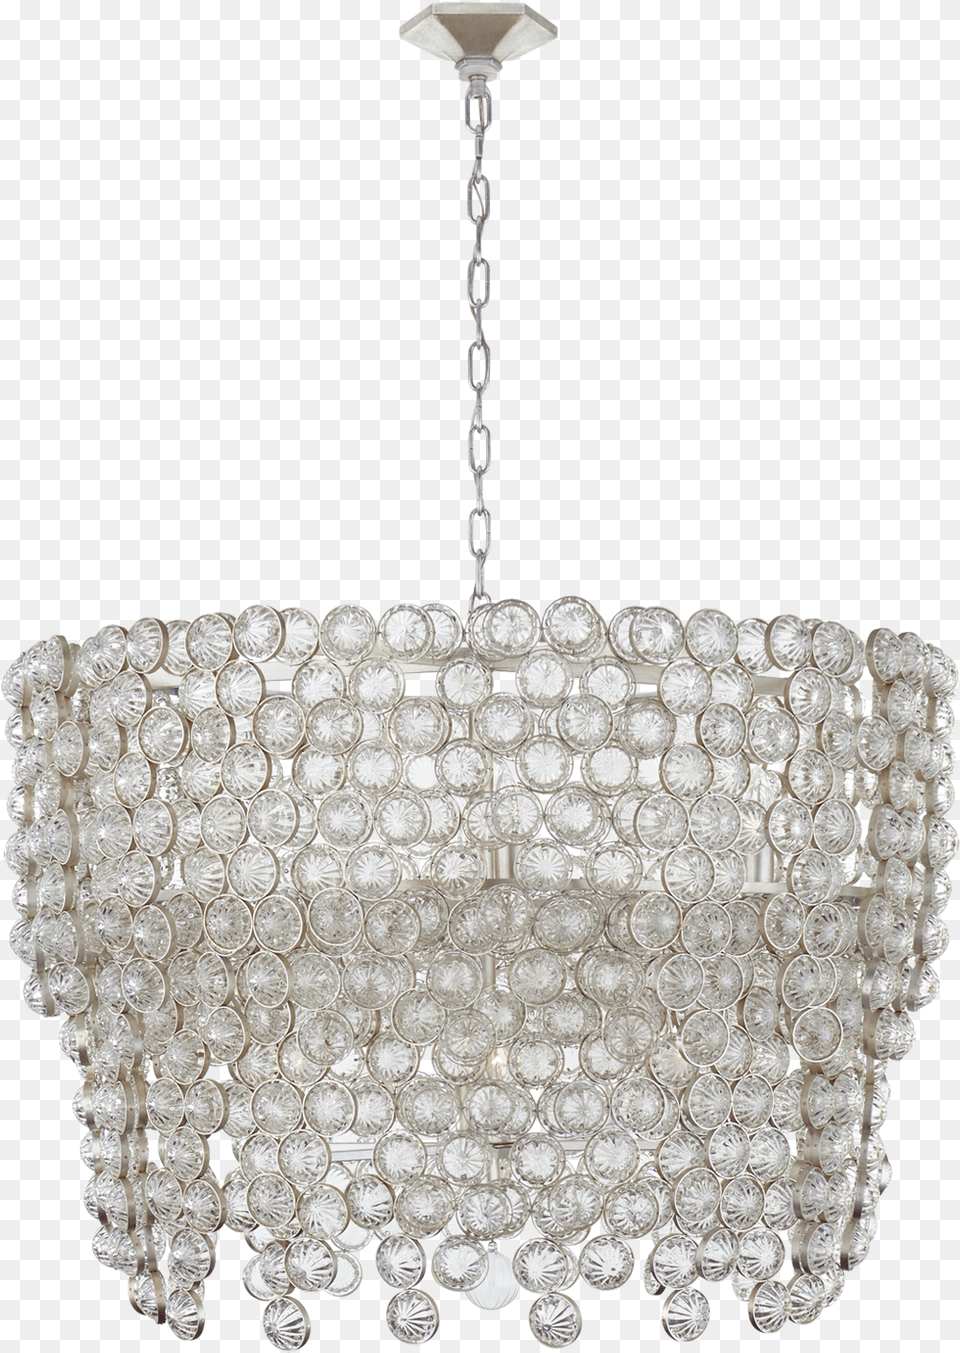 Chandelier, Lamp Free Png